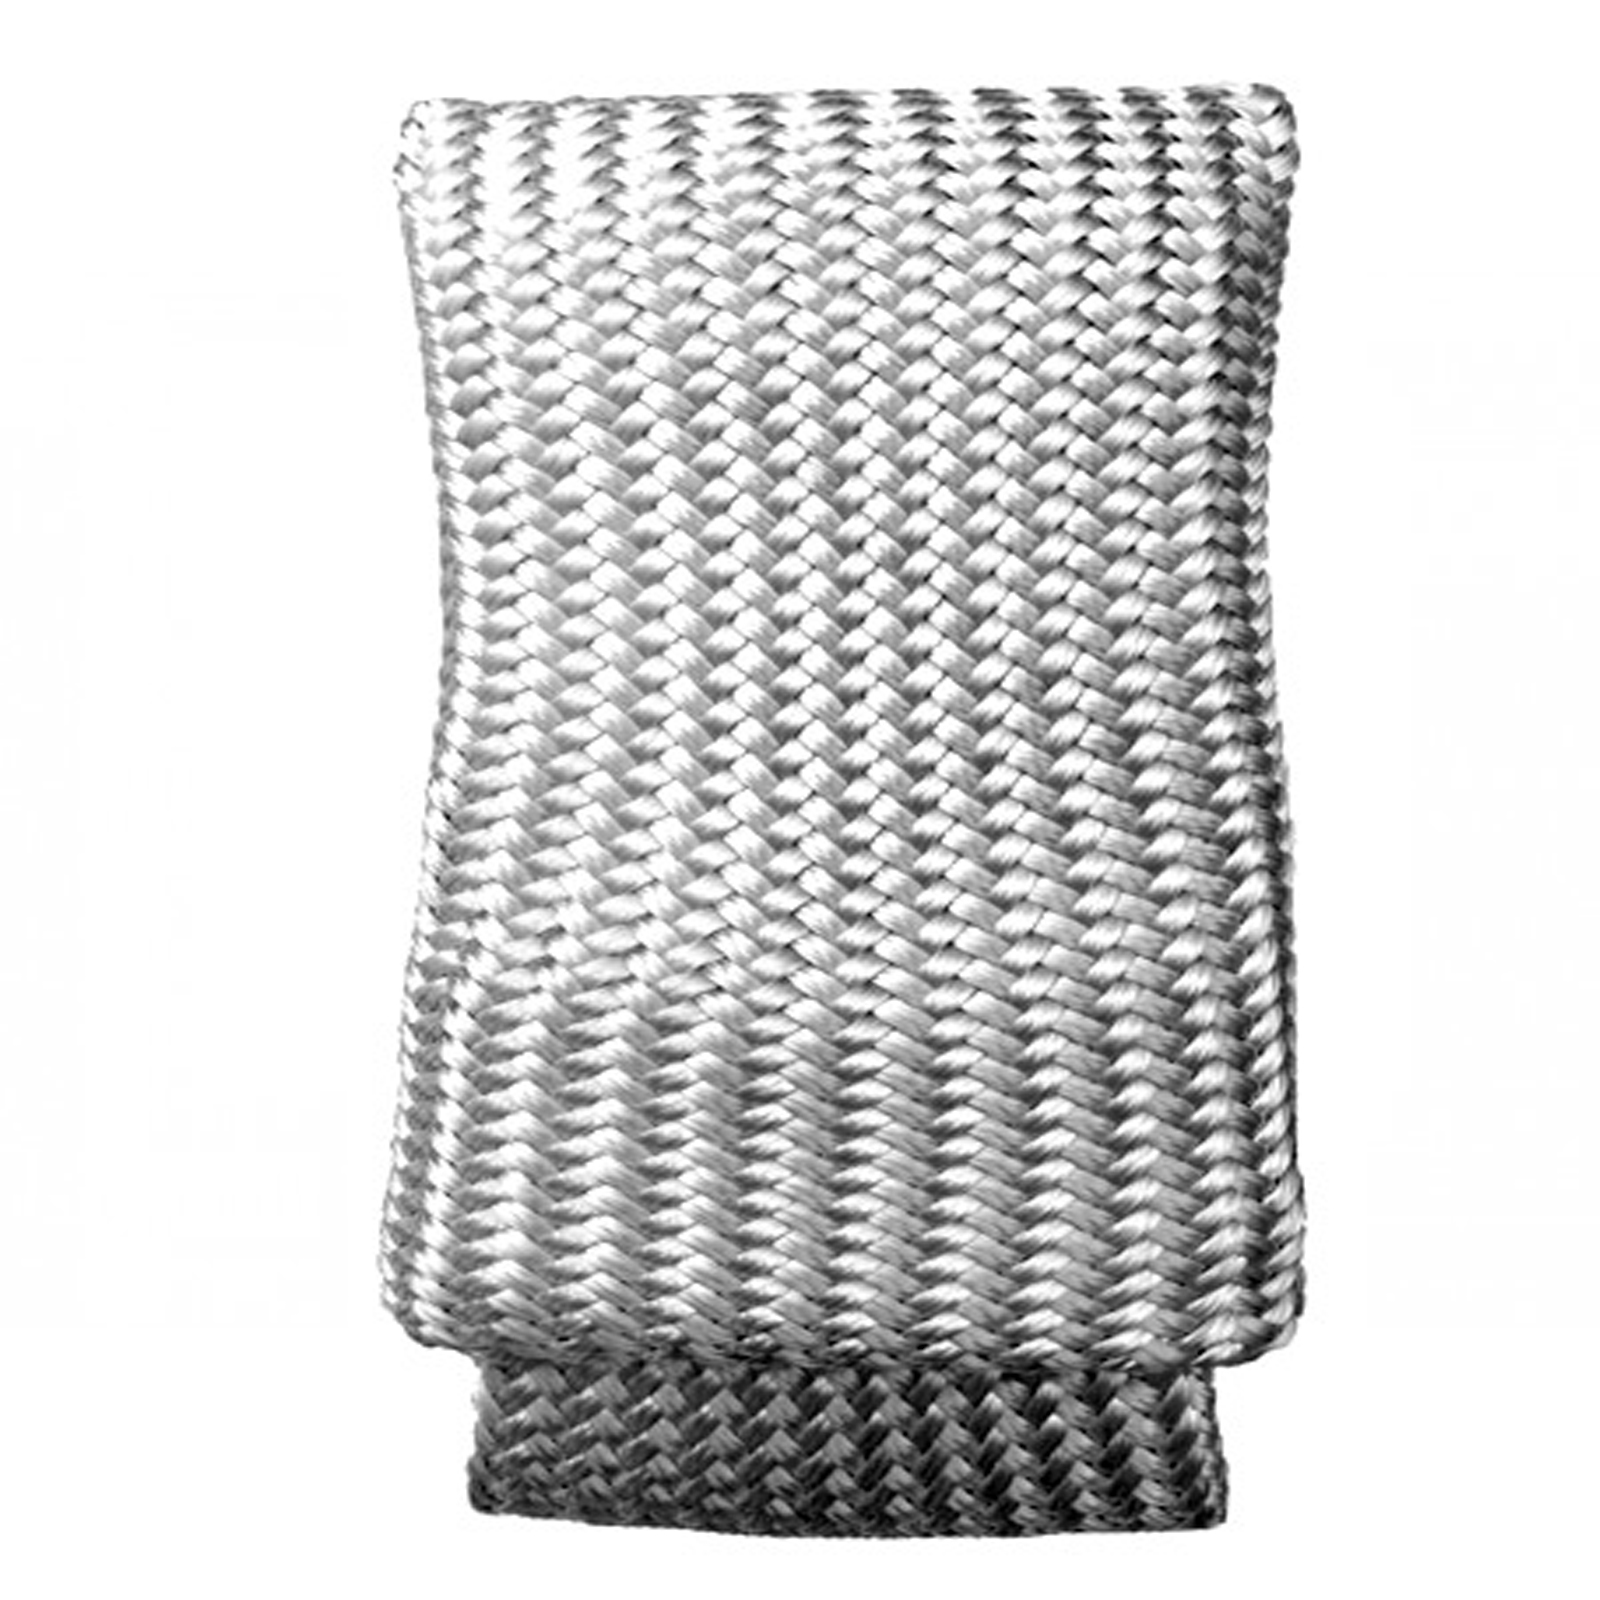 TIG FINGER XL Heat Shield As seen on Welding Tips and